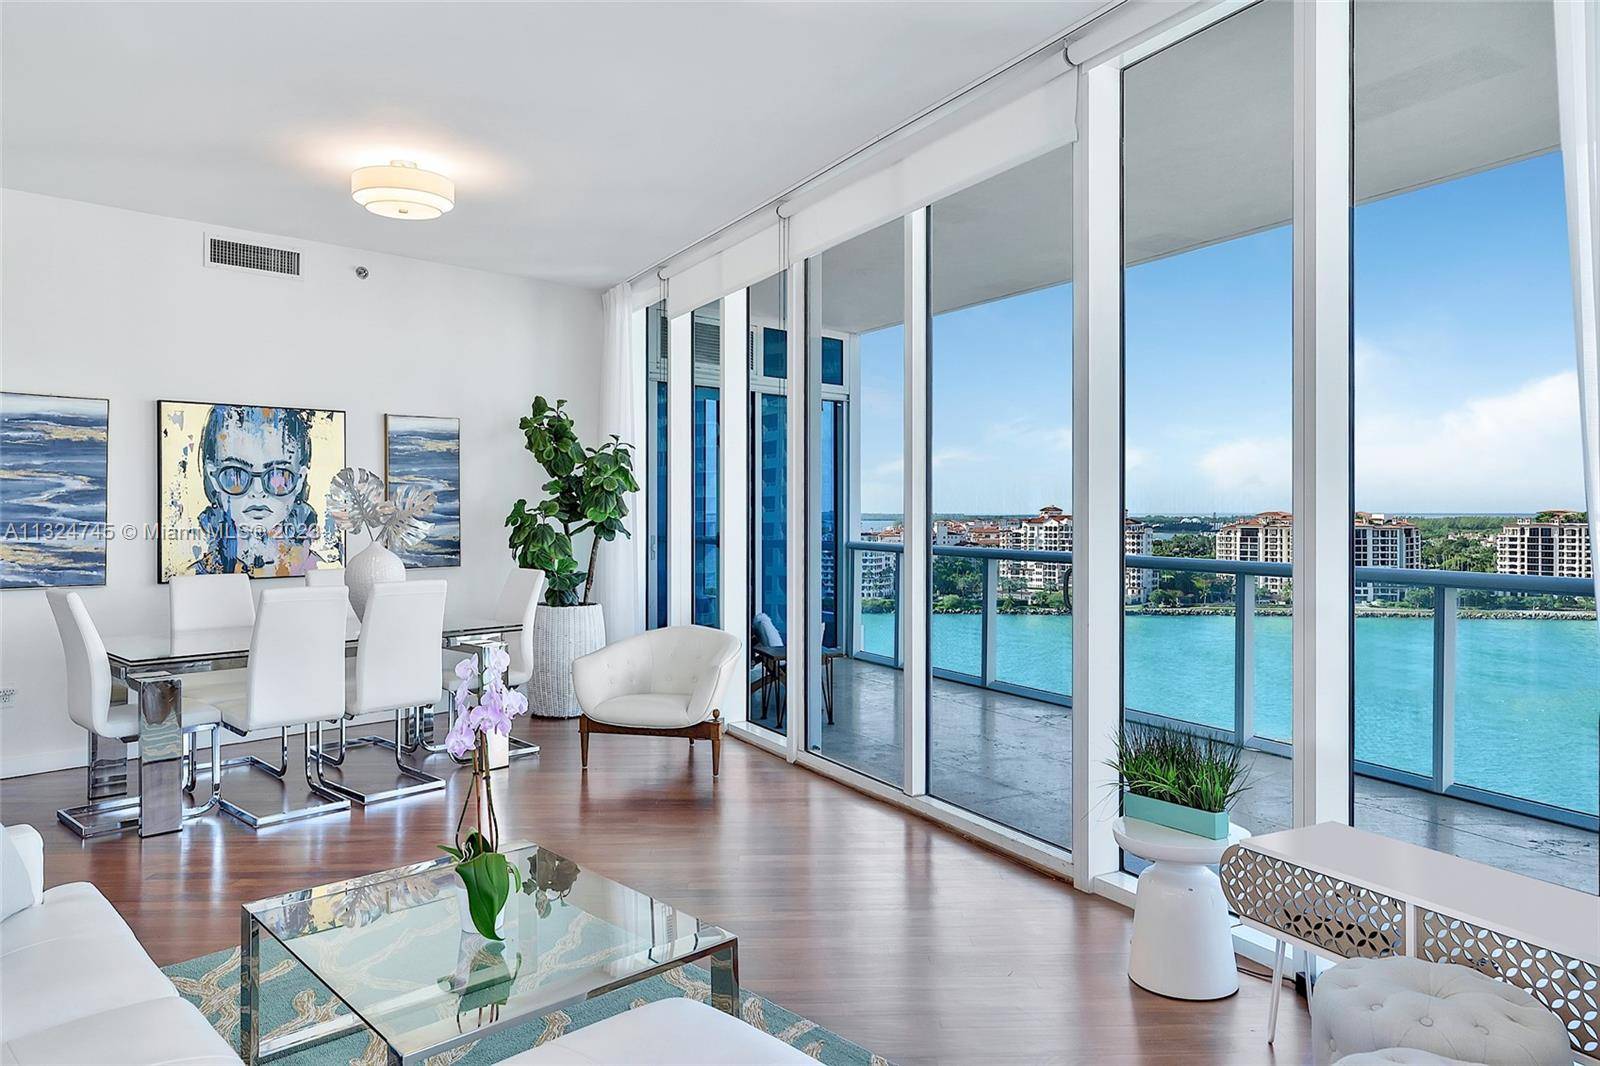 With limited inventory at the Continuum South Tower, this beautiful 2 bed 2 1 2 bath is a must see, as it's the only apt currently trading under 5 million.